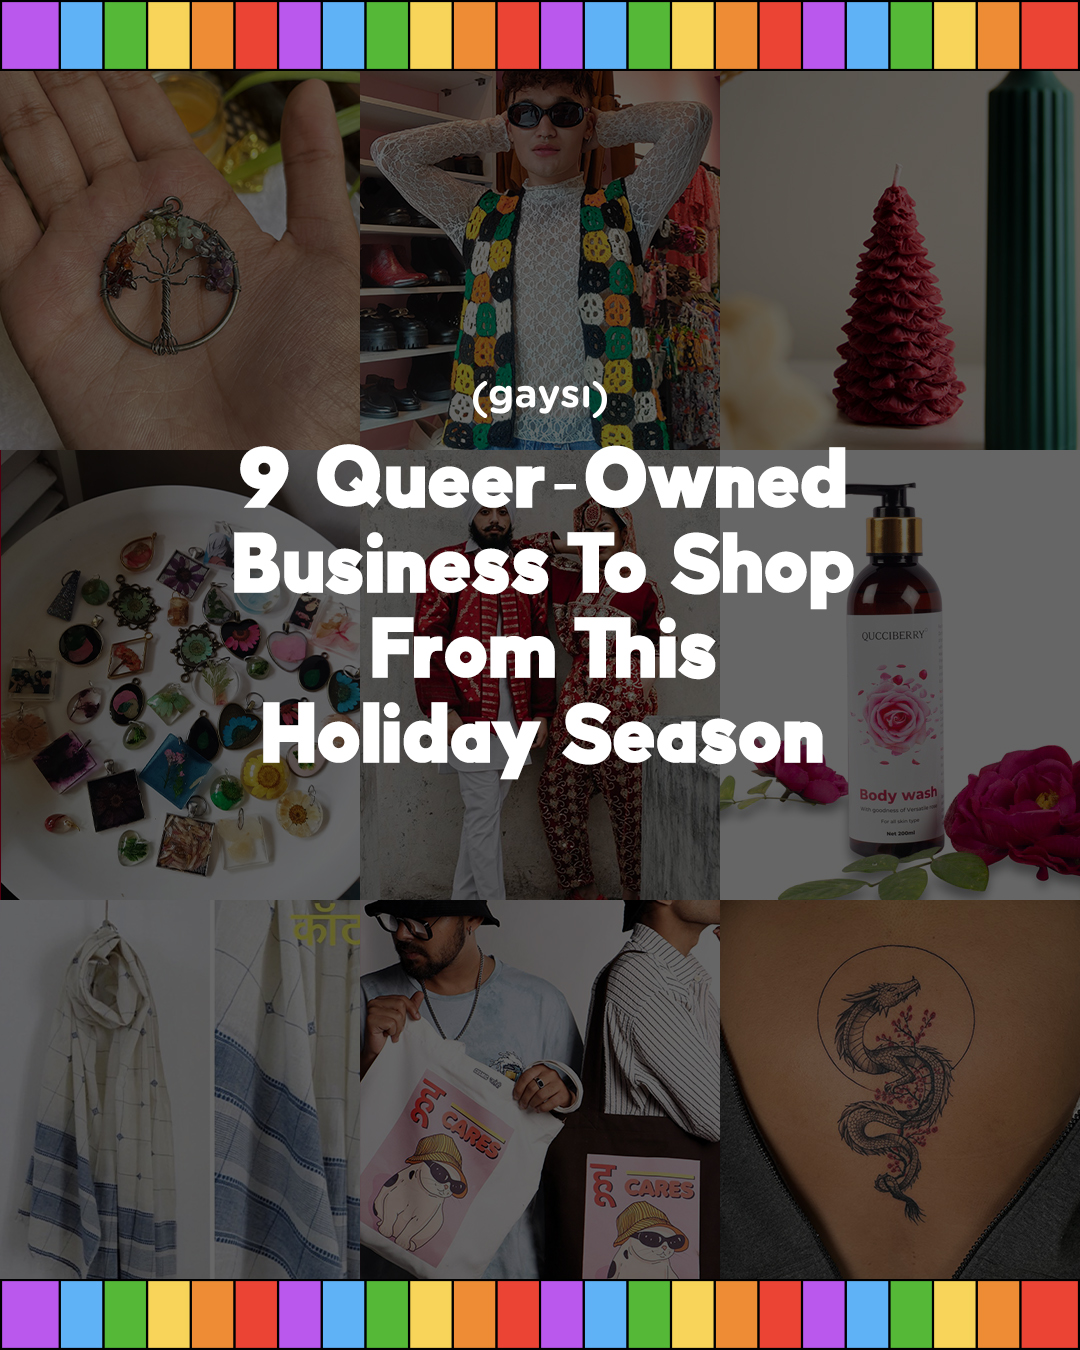 9 Queer-Owned Business To Shop From This Holiday Season